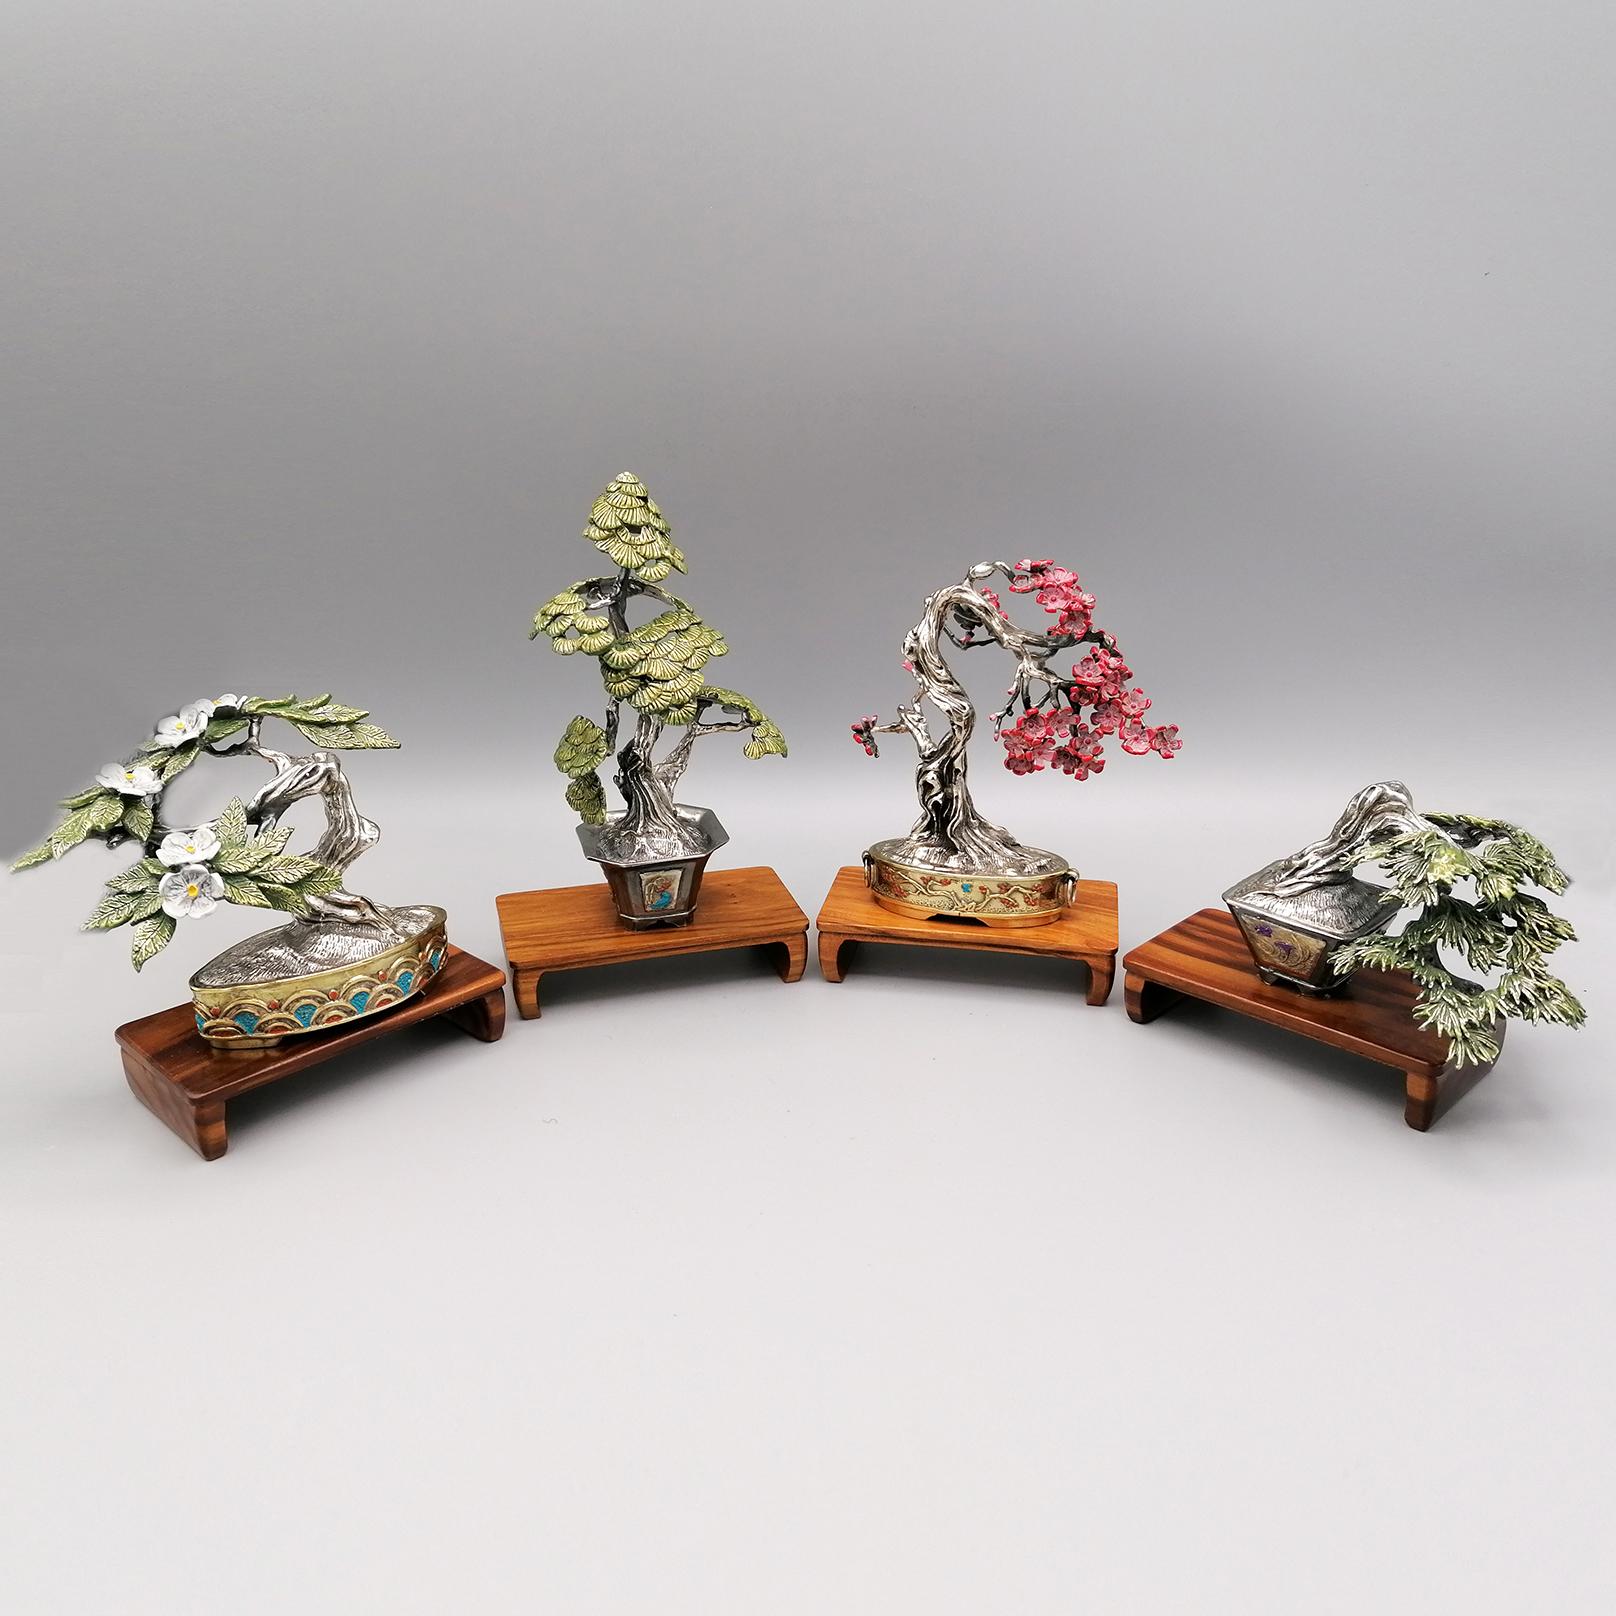 Collection of 4 Bonsai miniatures in solid silver handmade, gilded, enamelled and burnished

1. Japanese apricot bonsai gr. 220 cm. 6 x 10.5 H. 8.5
wooden base 5 x 9 H.2 cm.
2. Japanese white pine gr. 200 cm. 7 x 5 H. 13
wooden base 5 x 9 H.2